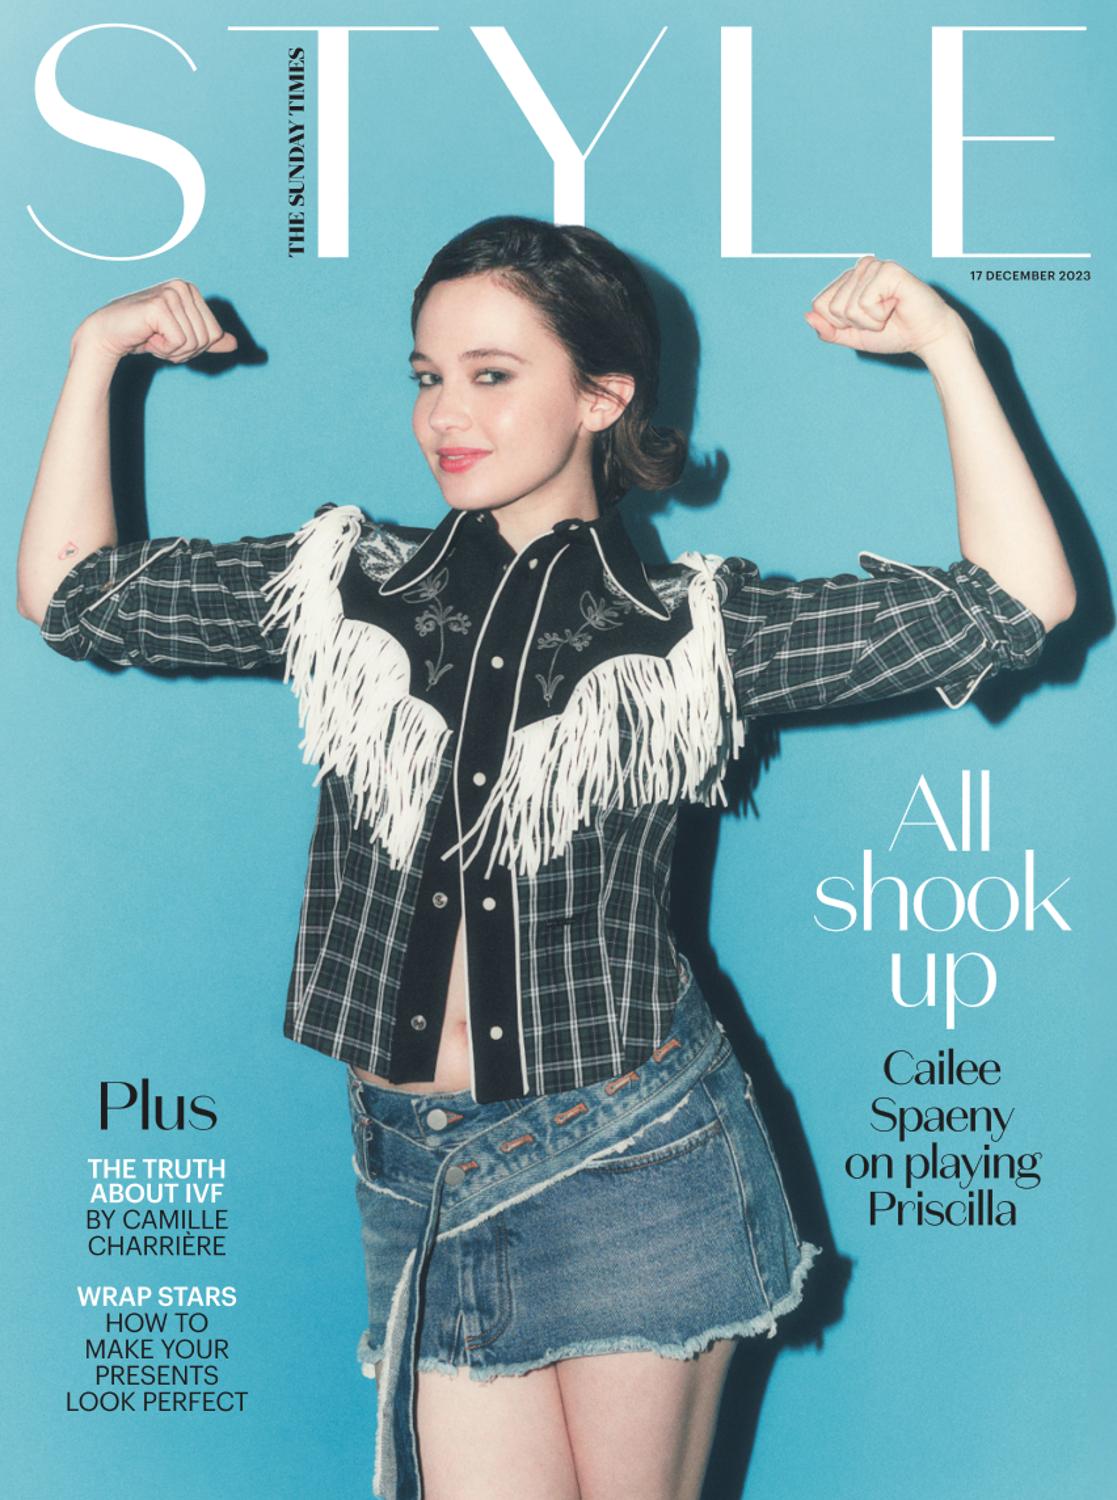 The Sunday Times Style – December 17, 2023